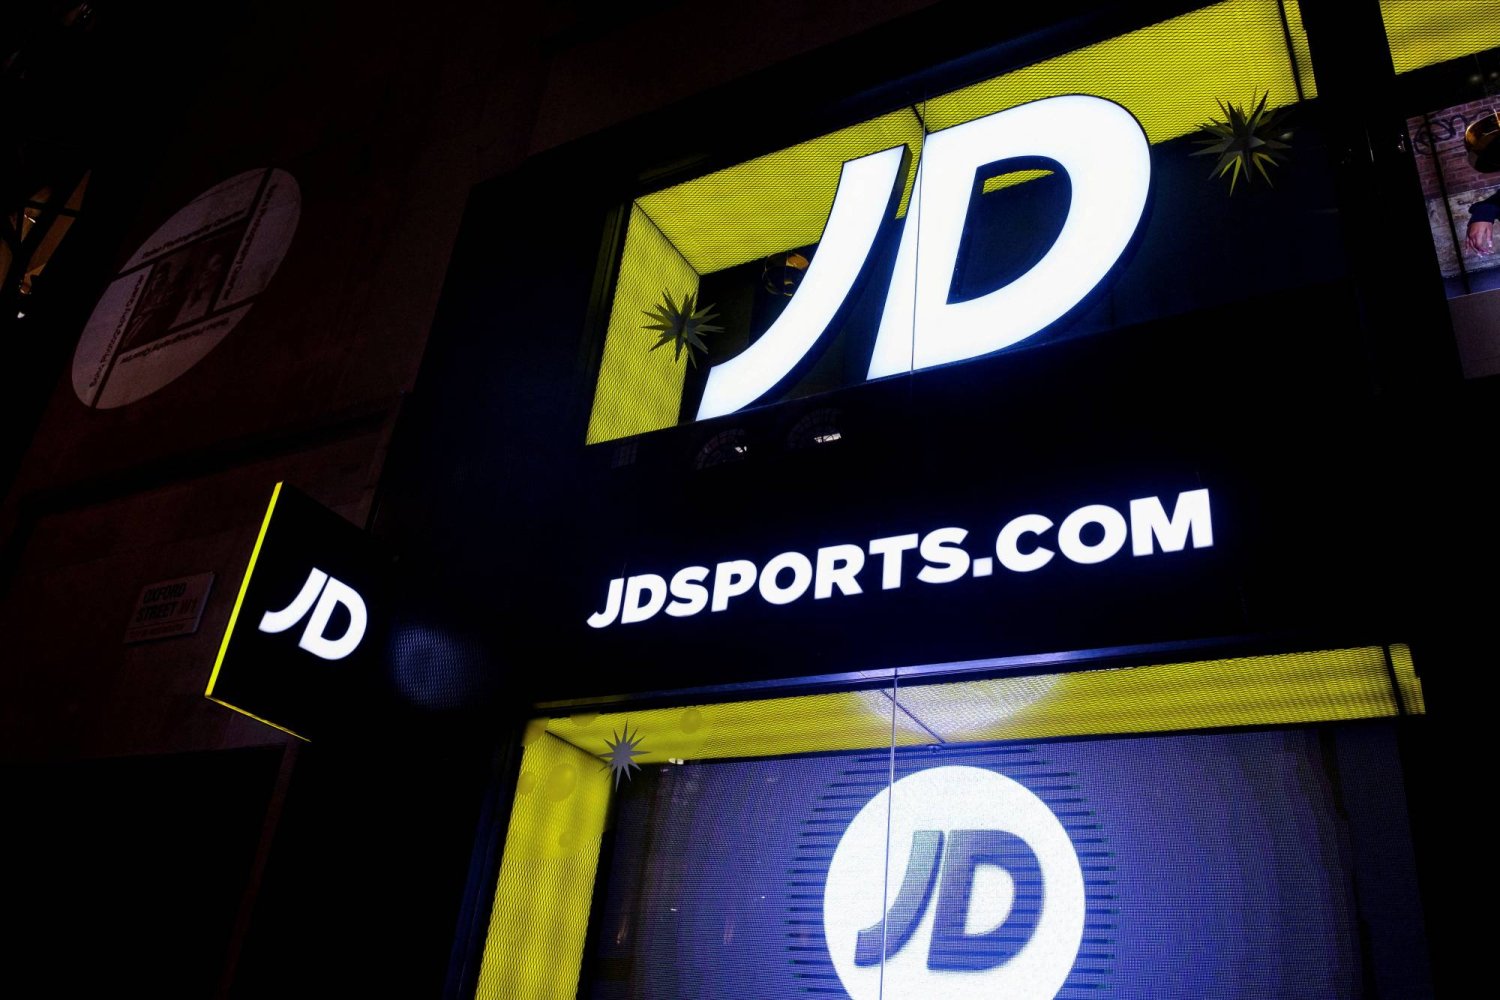 FILE PHOTO: JD Sports logo is seen on the exterior of a store in London, Britain, November 17, 2021. REUTERS/May James/File Photo